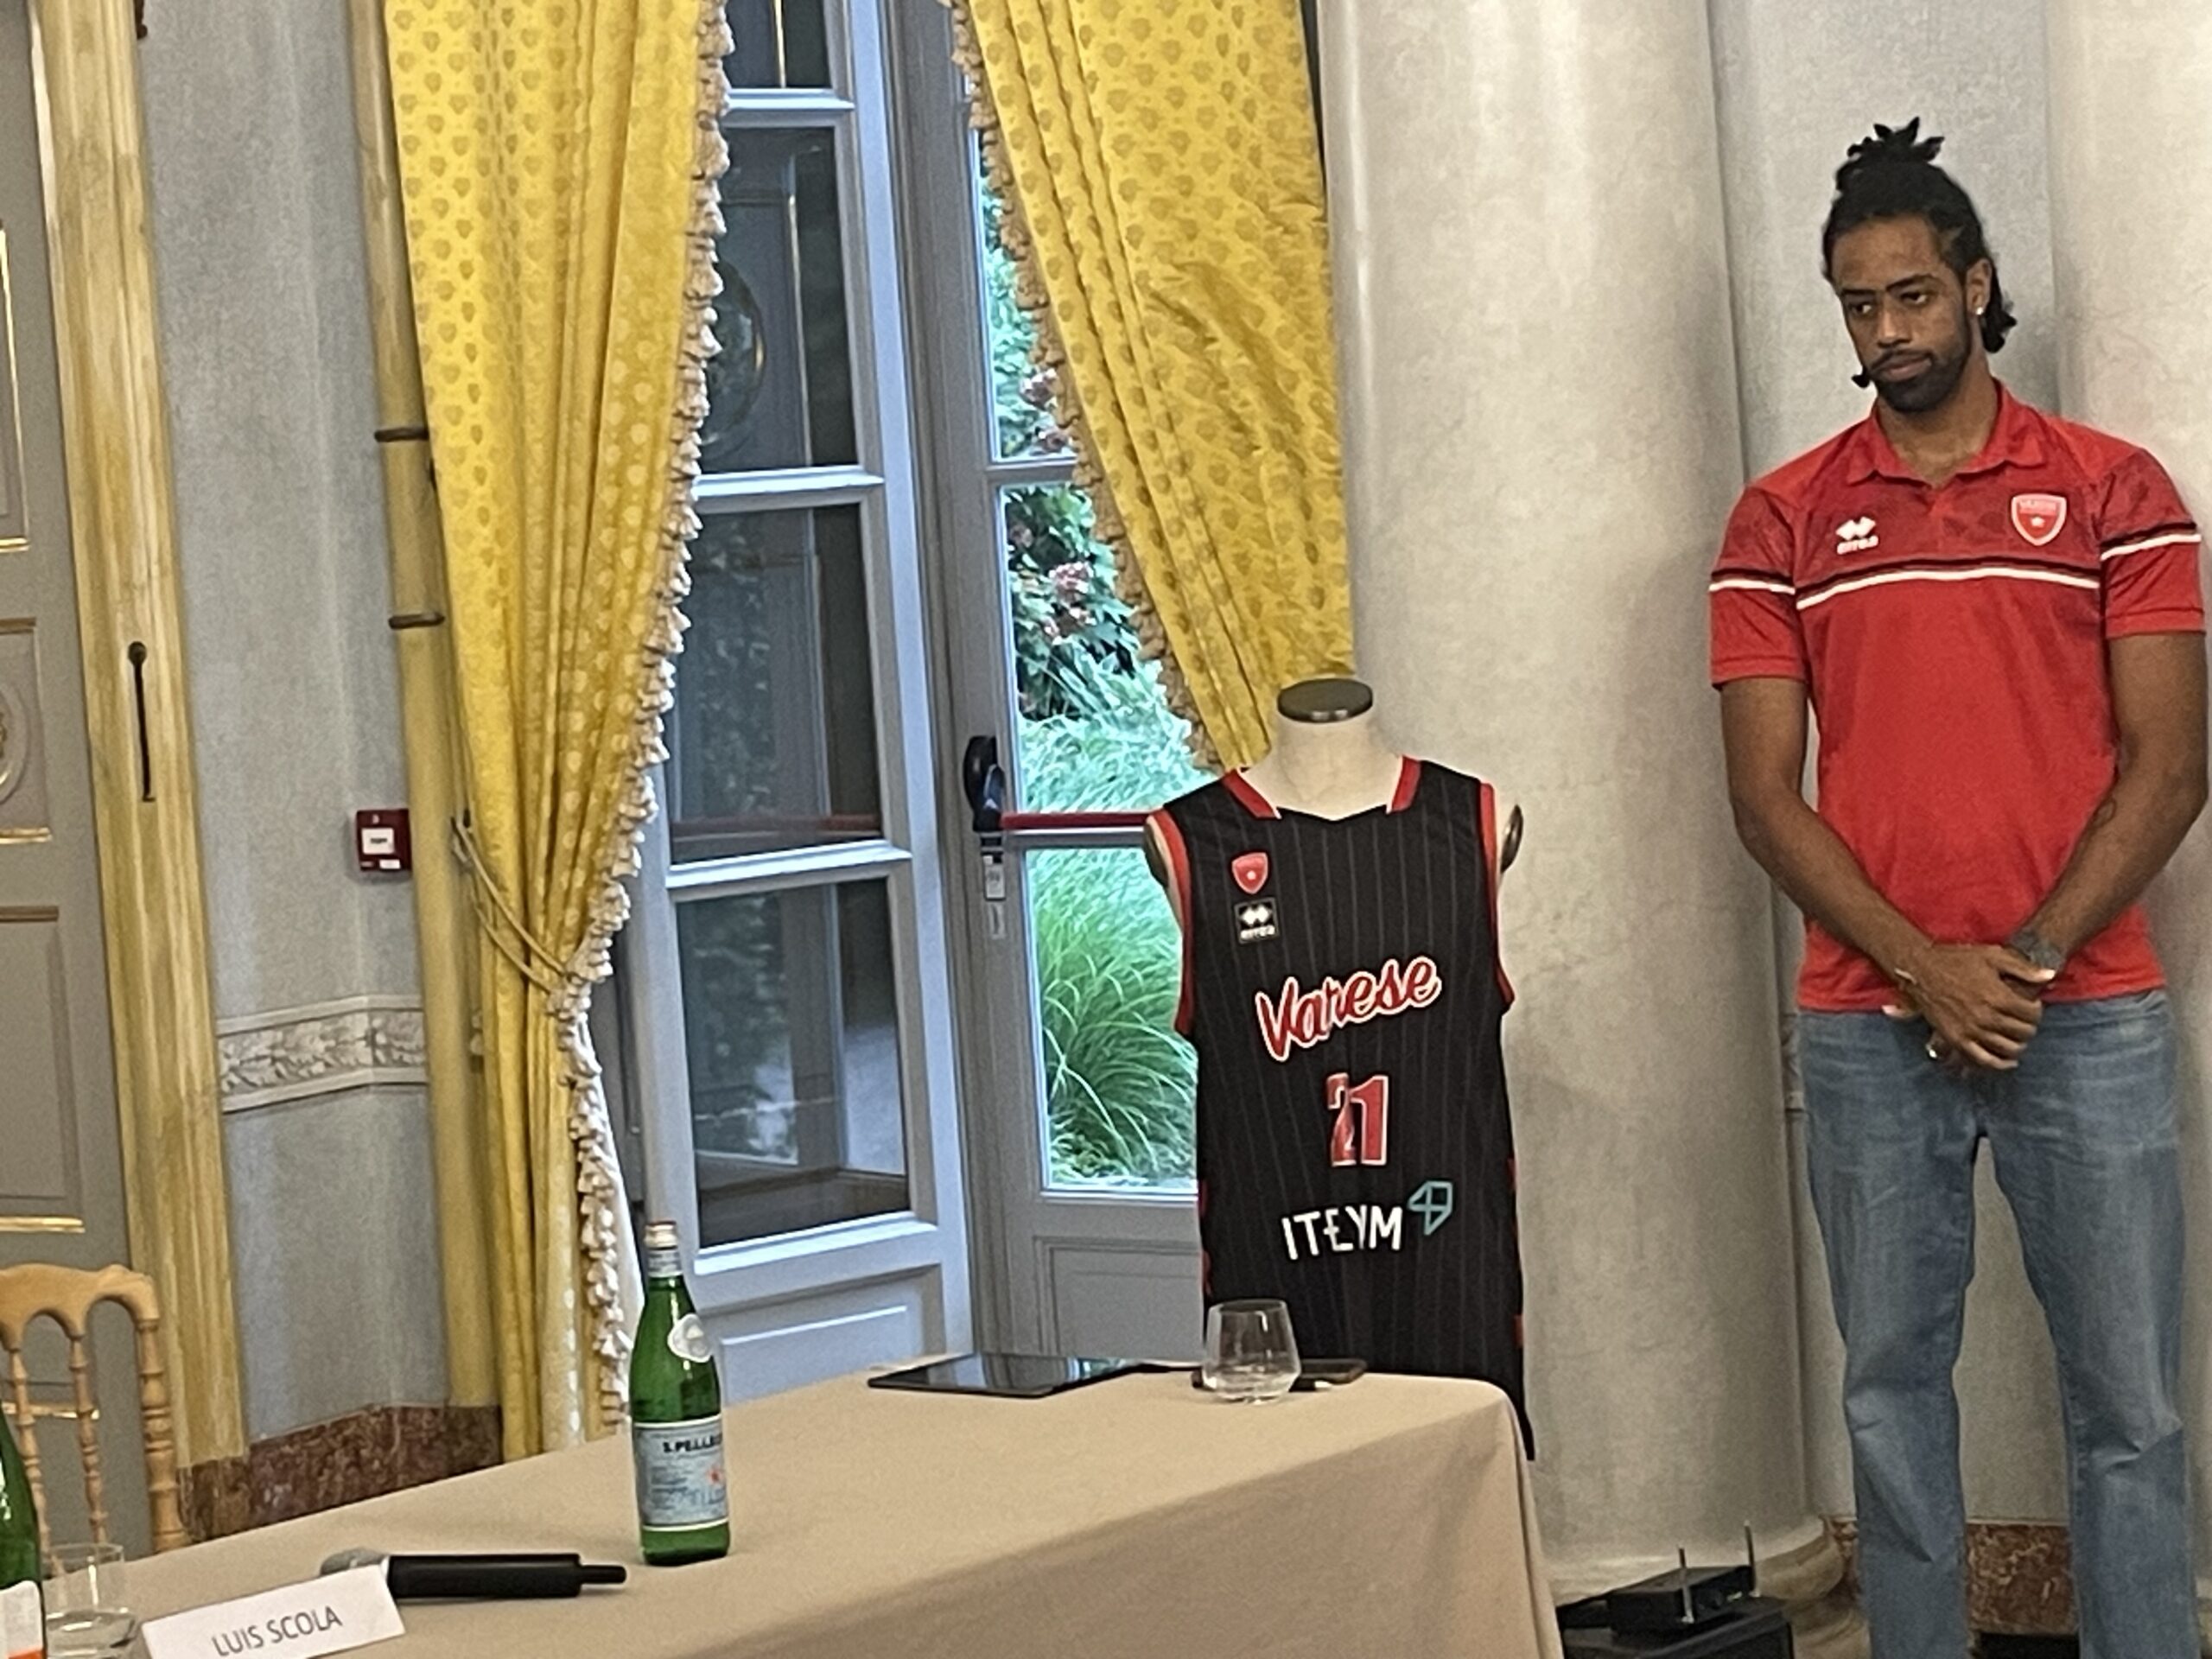 New chapter: Luis Scola announced as a new CEO of Pallacanestro Varese /  News 